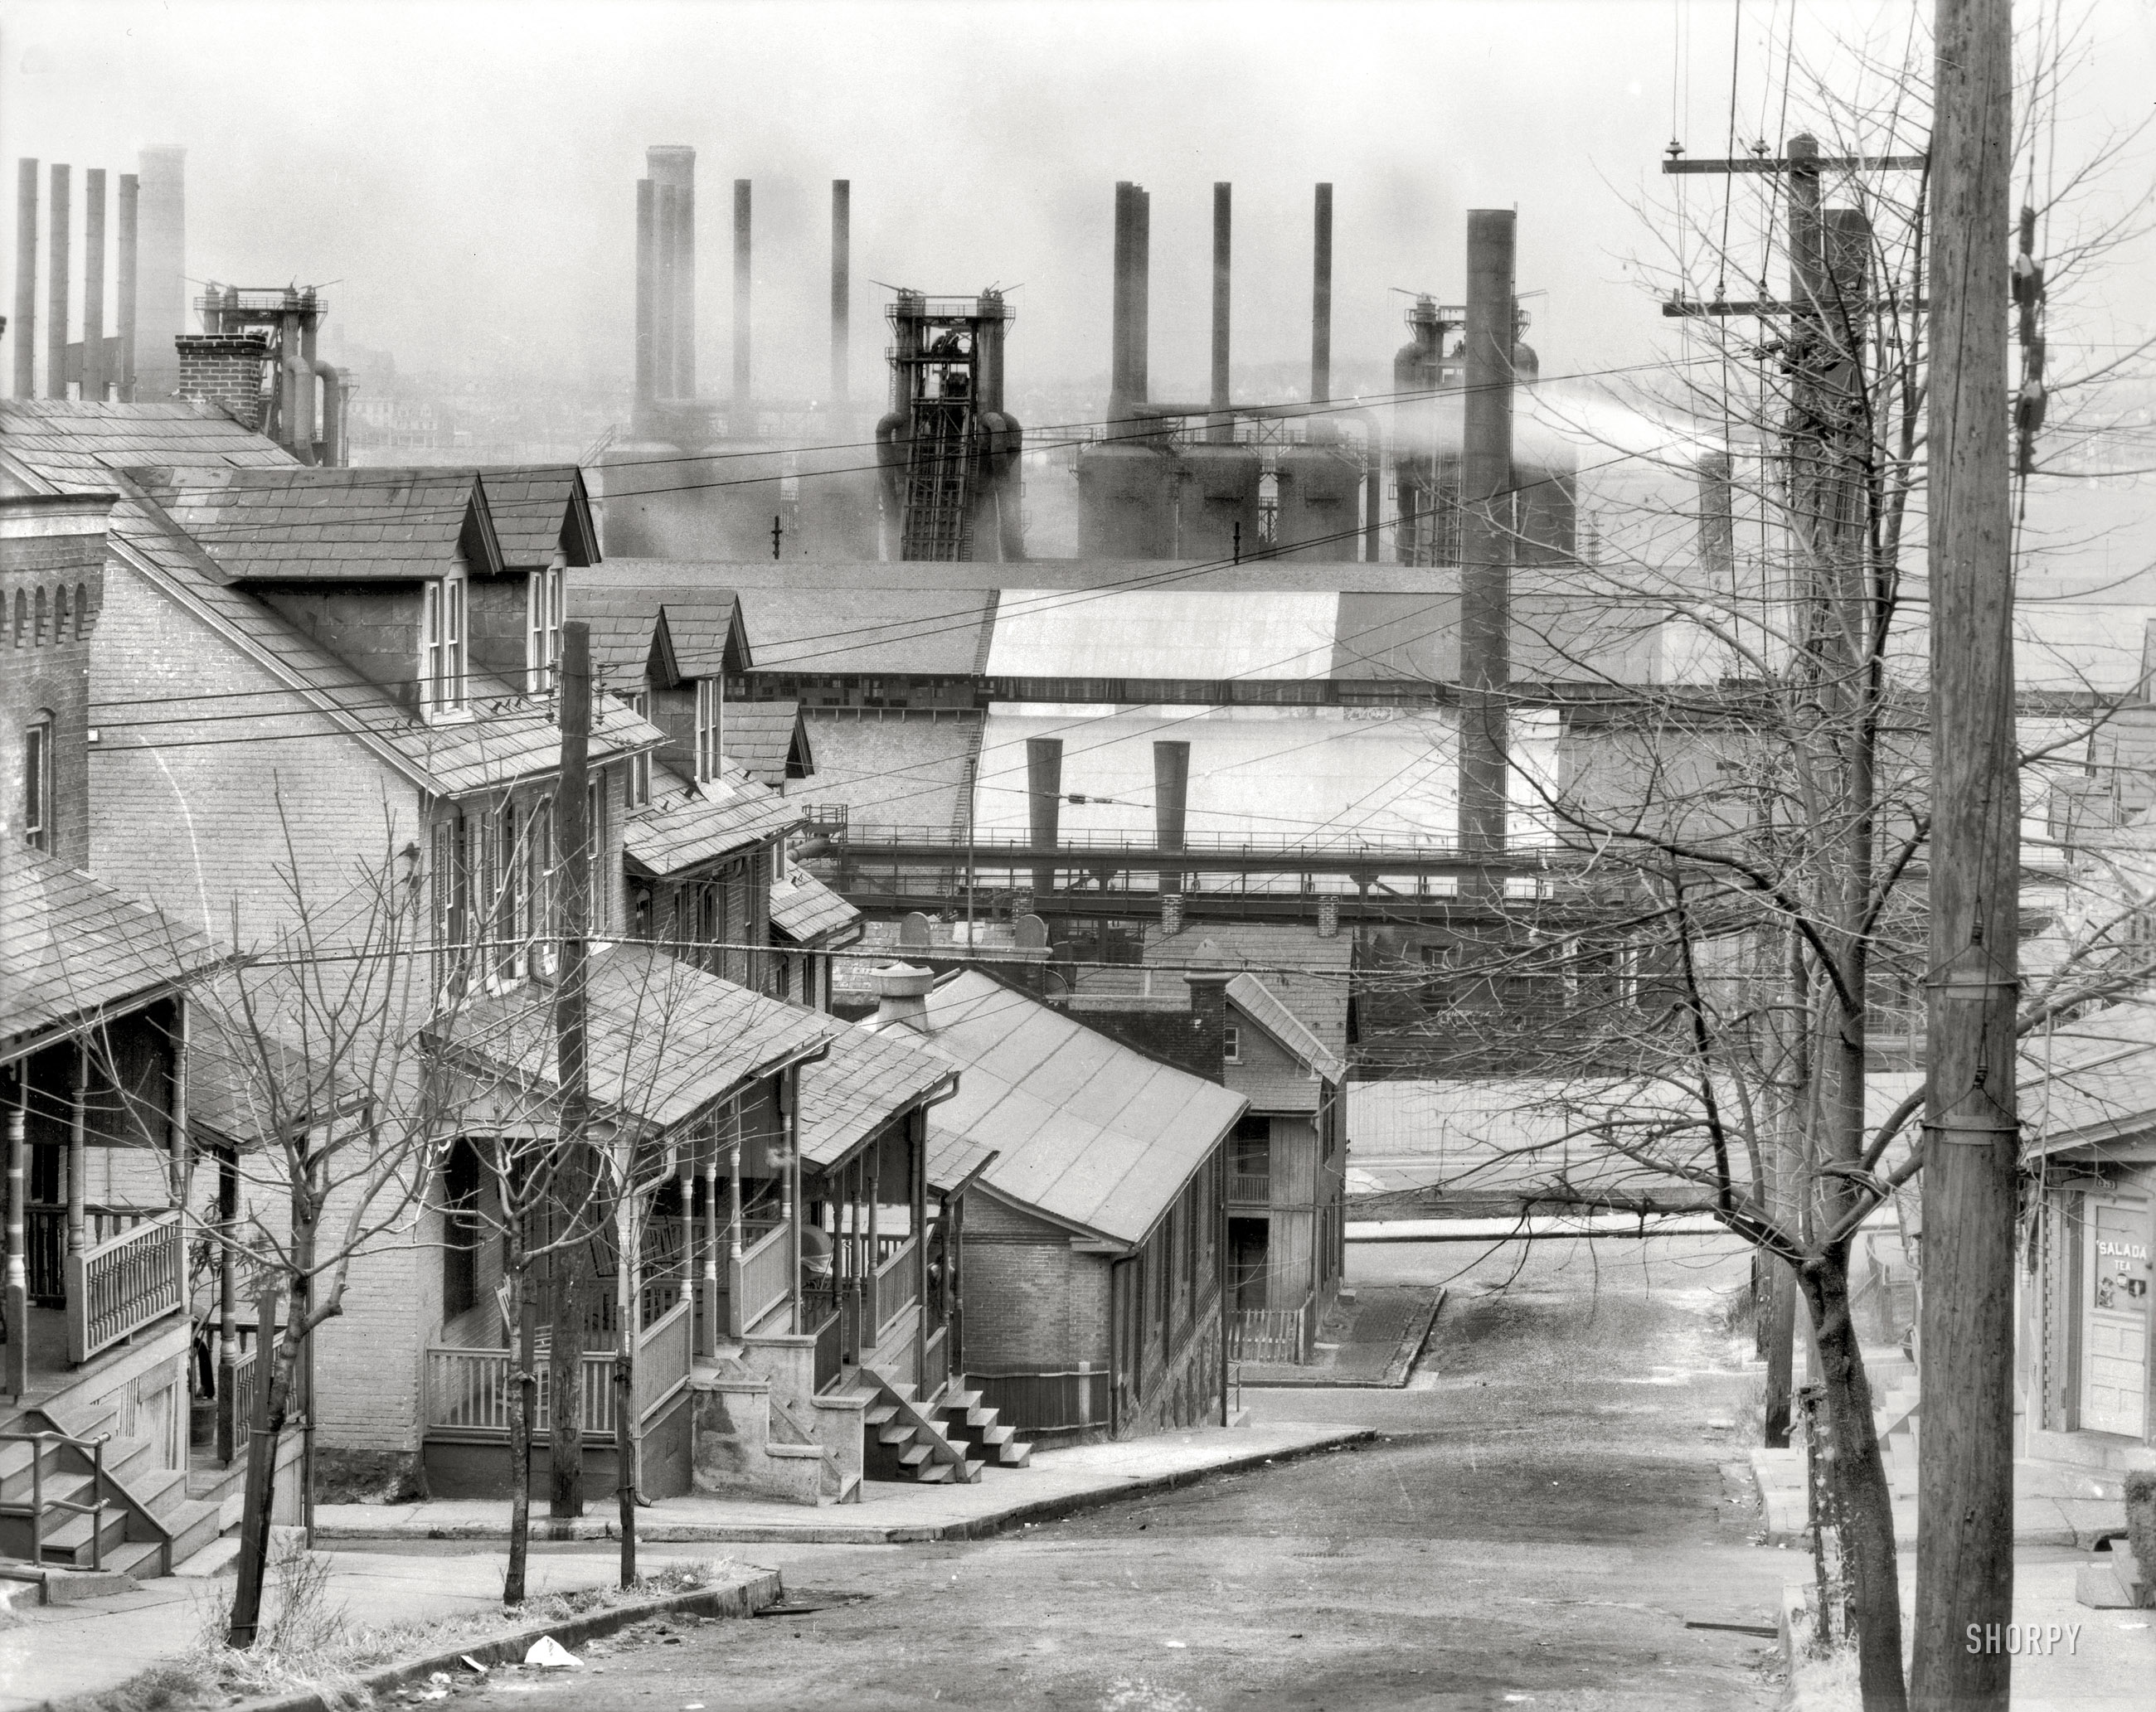 November 1935. "Bethlehem houses and steel mill. Pennsylvania." 8x10 inch nitrate negative by Walker Evans for the Resettlement Administration. View full size.